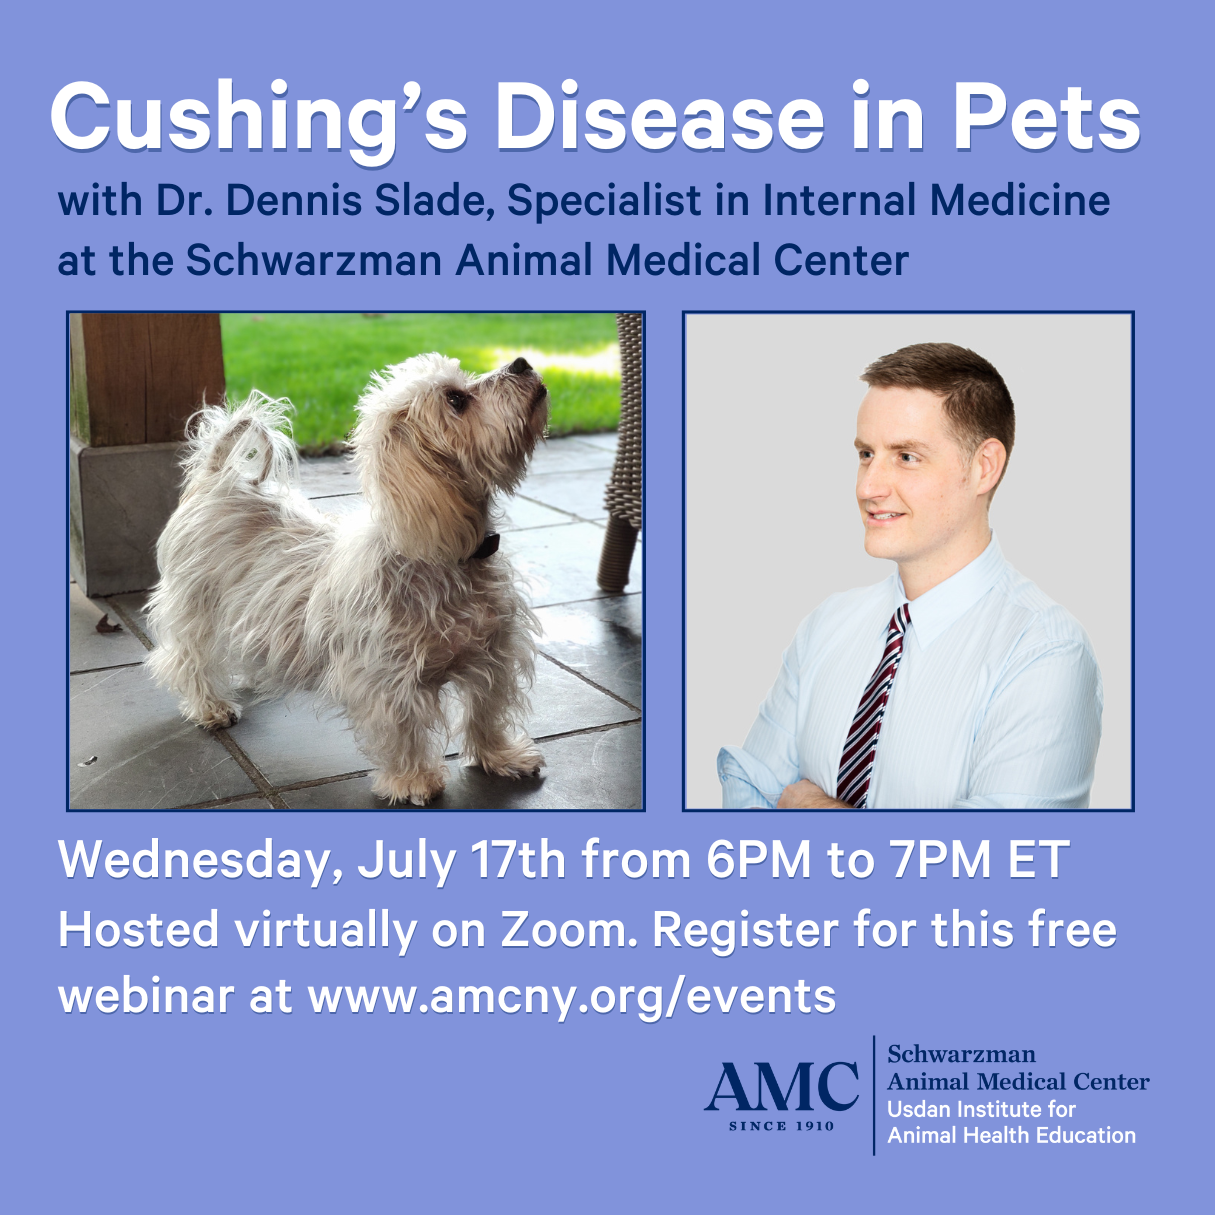 Cushing's Disease in Pets infographic with headshot of Dr. Dennis Slade and photo of dog with Cushing's Disease.